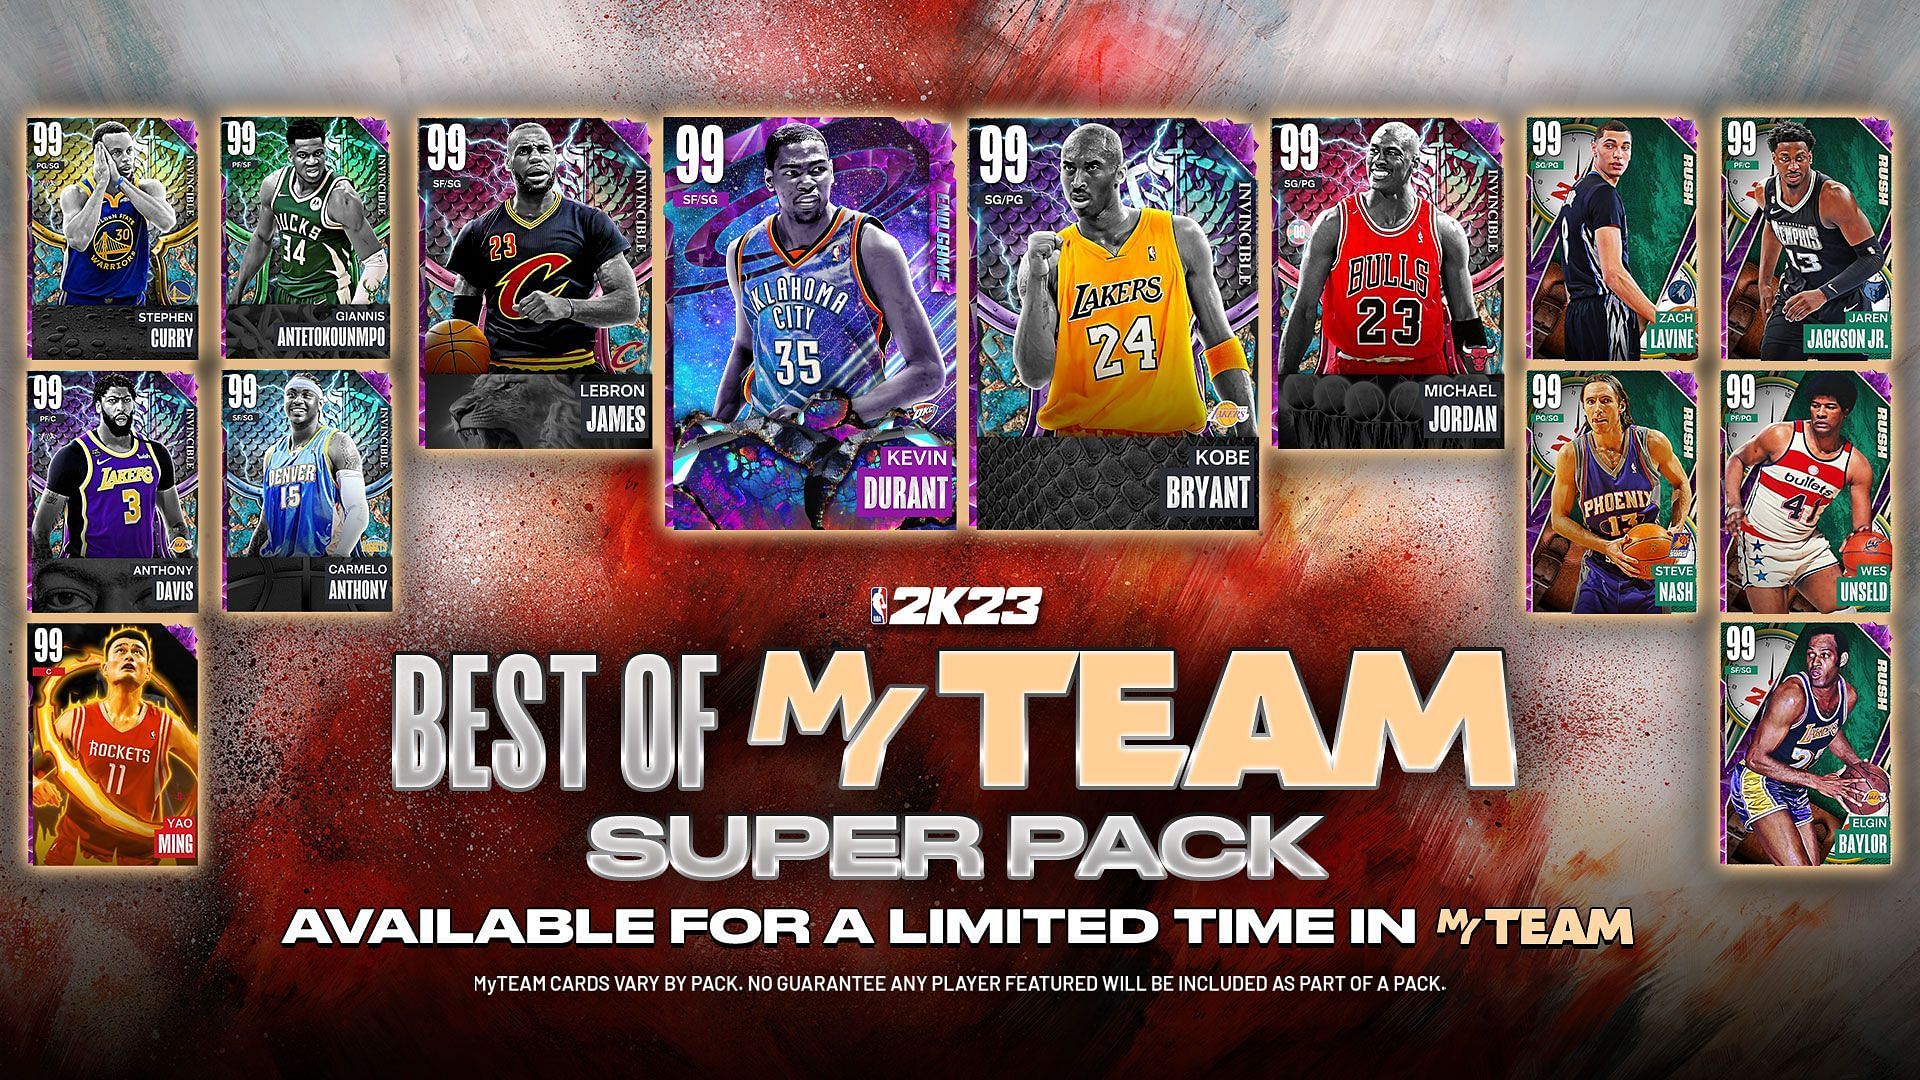 The Best of MyTeam super pack is available in the MyTeam mode of NBA 2K23 (Image via 2K)